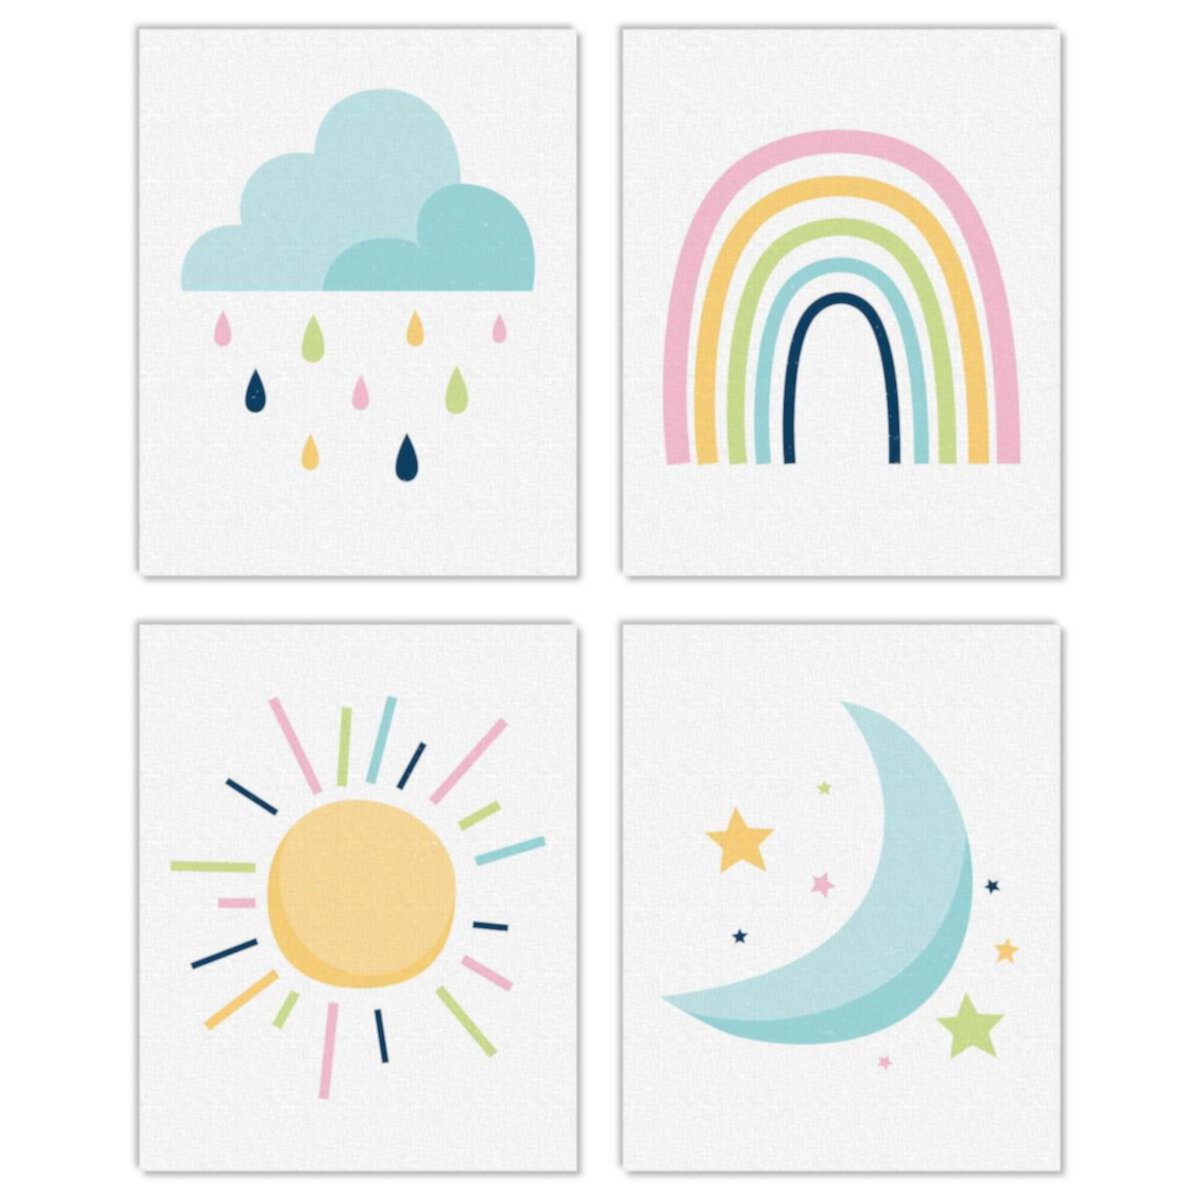 Big Dot of Happiness Colorful Children's Decor - Unframed Rainbow, Cloud, Sun, and Moon Linen Paper Wall Art - Set of 4 - Artisms - 8 x 10 inches Big Dot of Happiness